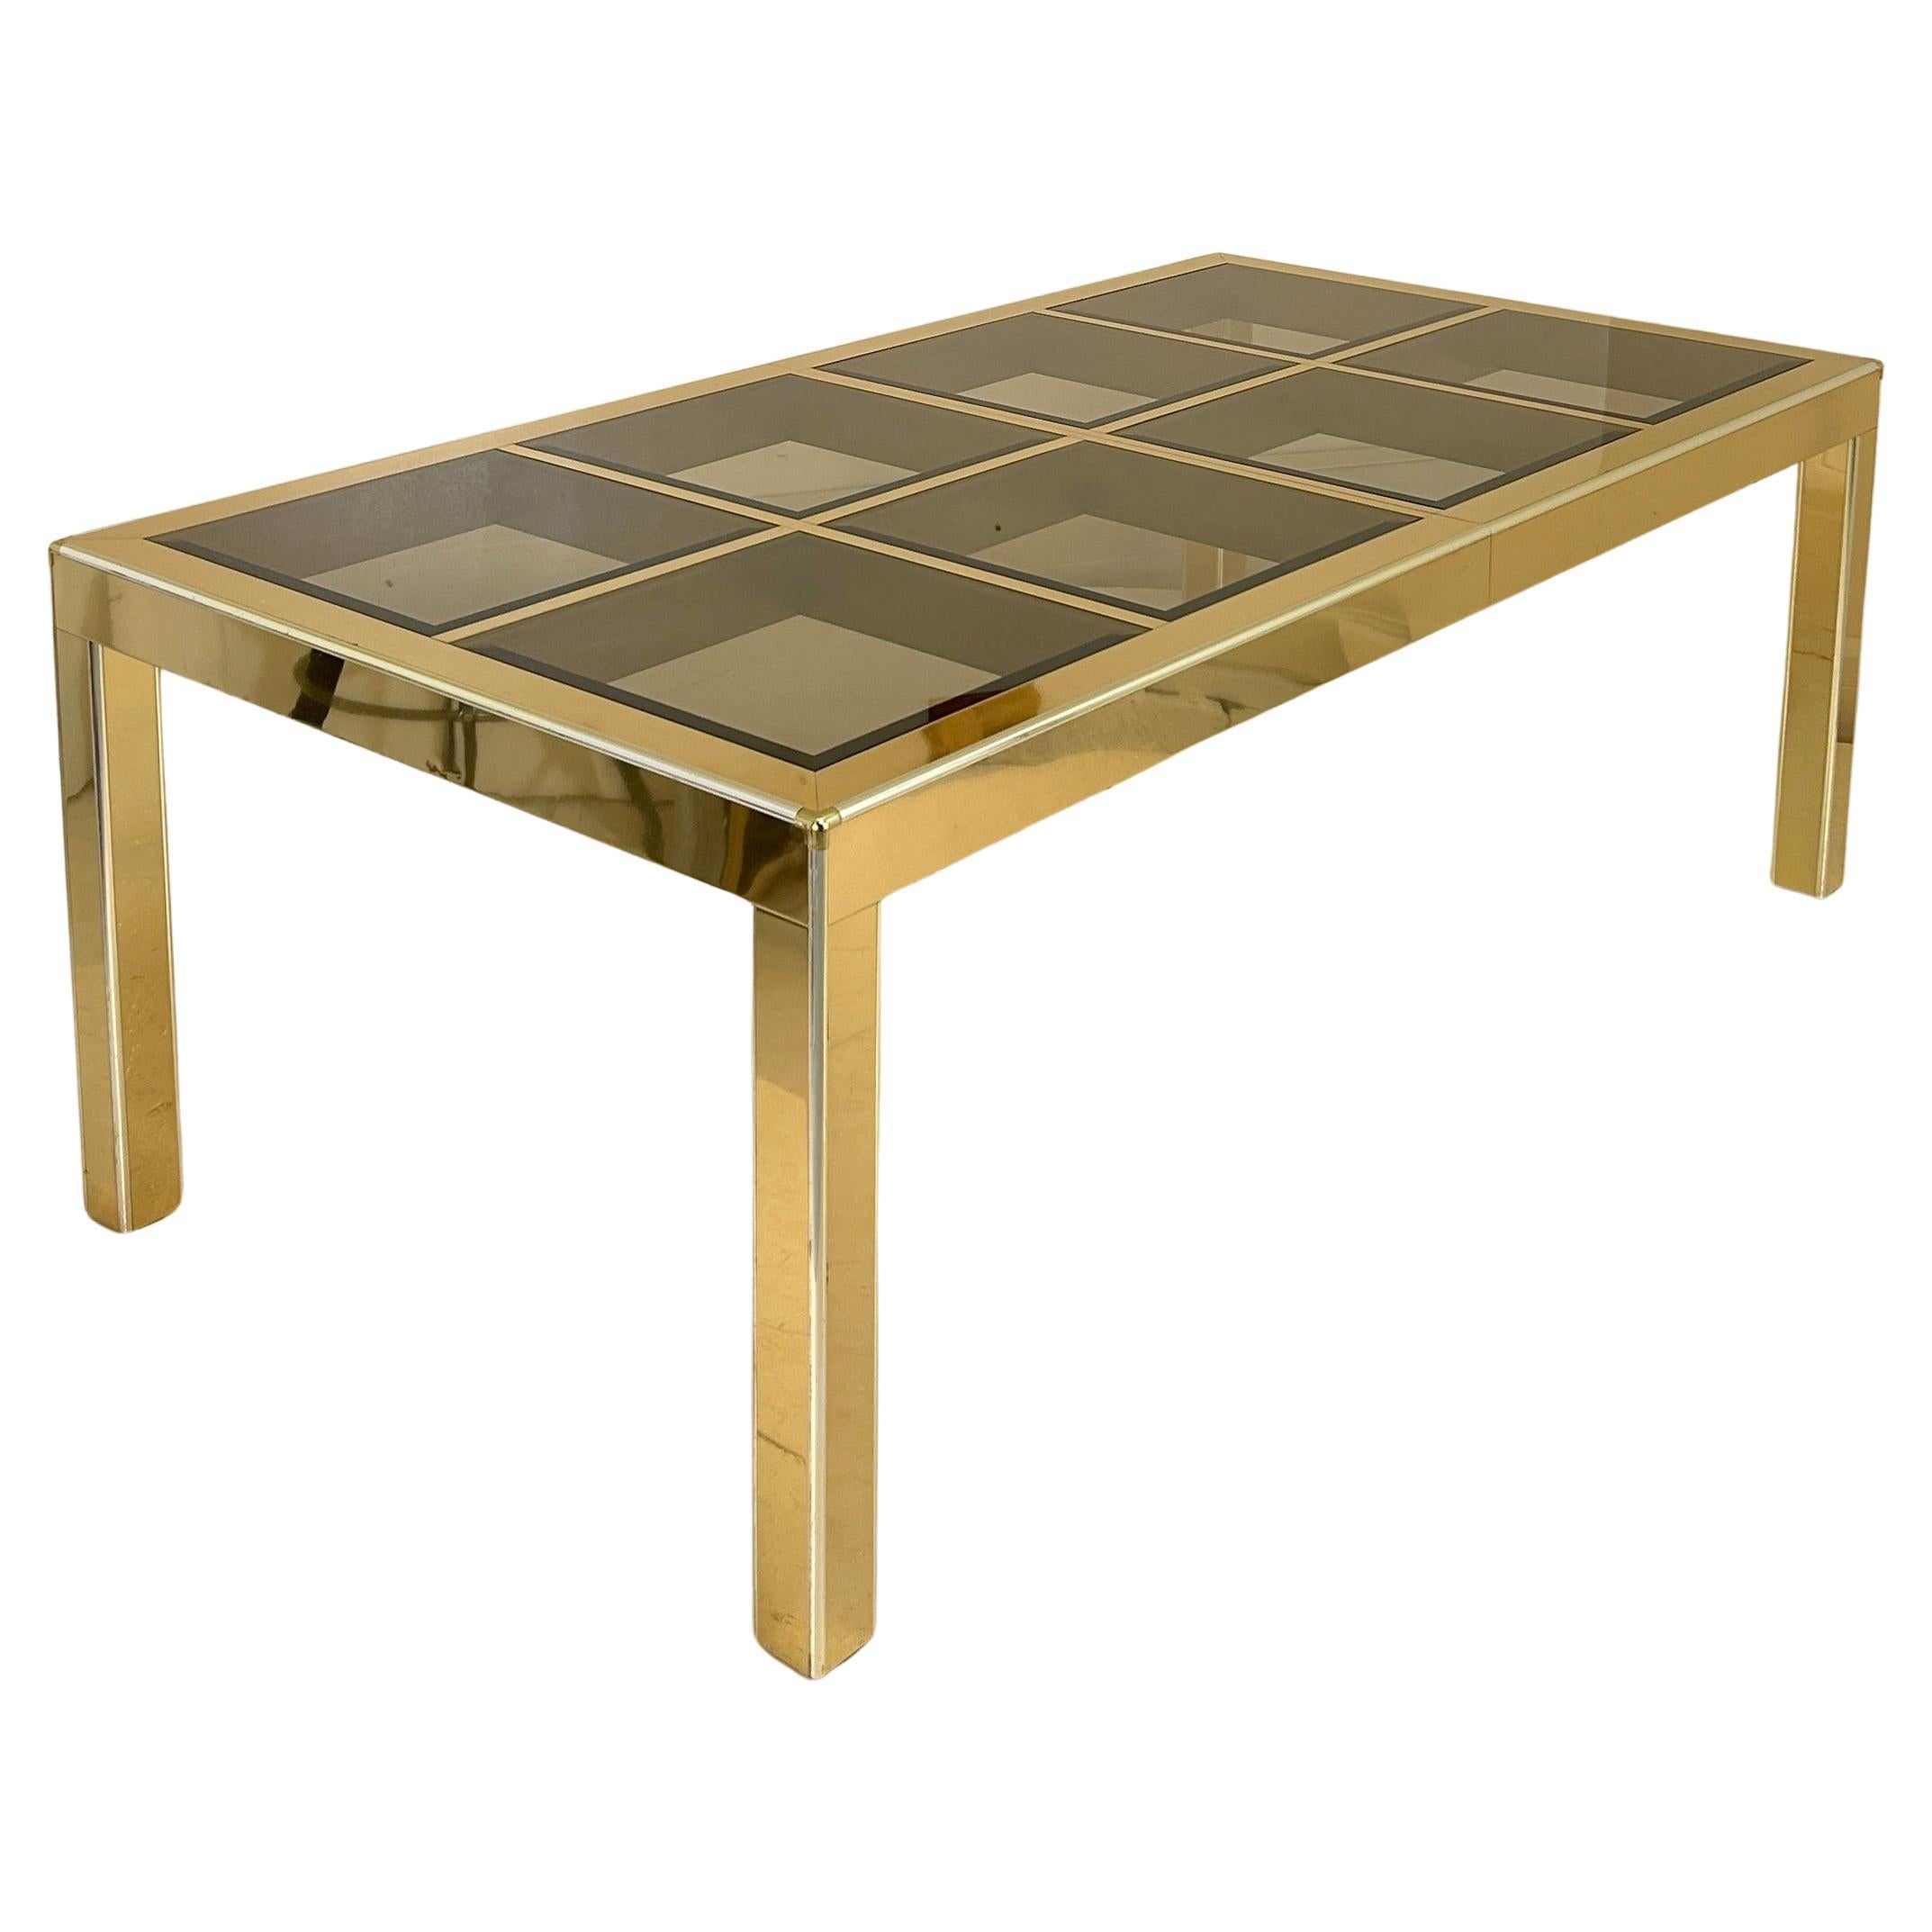 Mastercraft Brass Dining Table with glass inserts For Sale